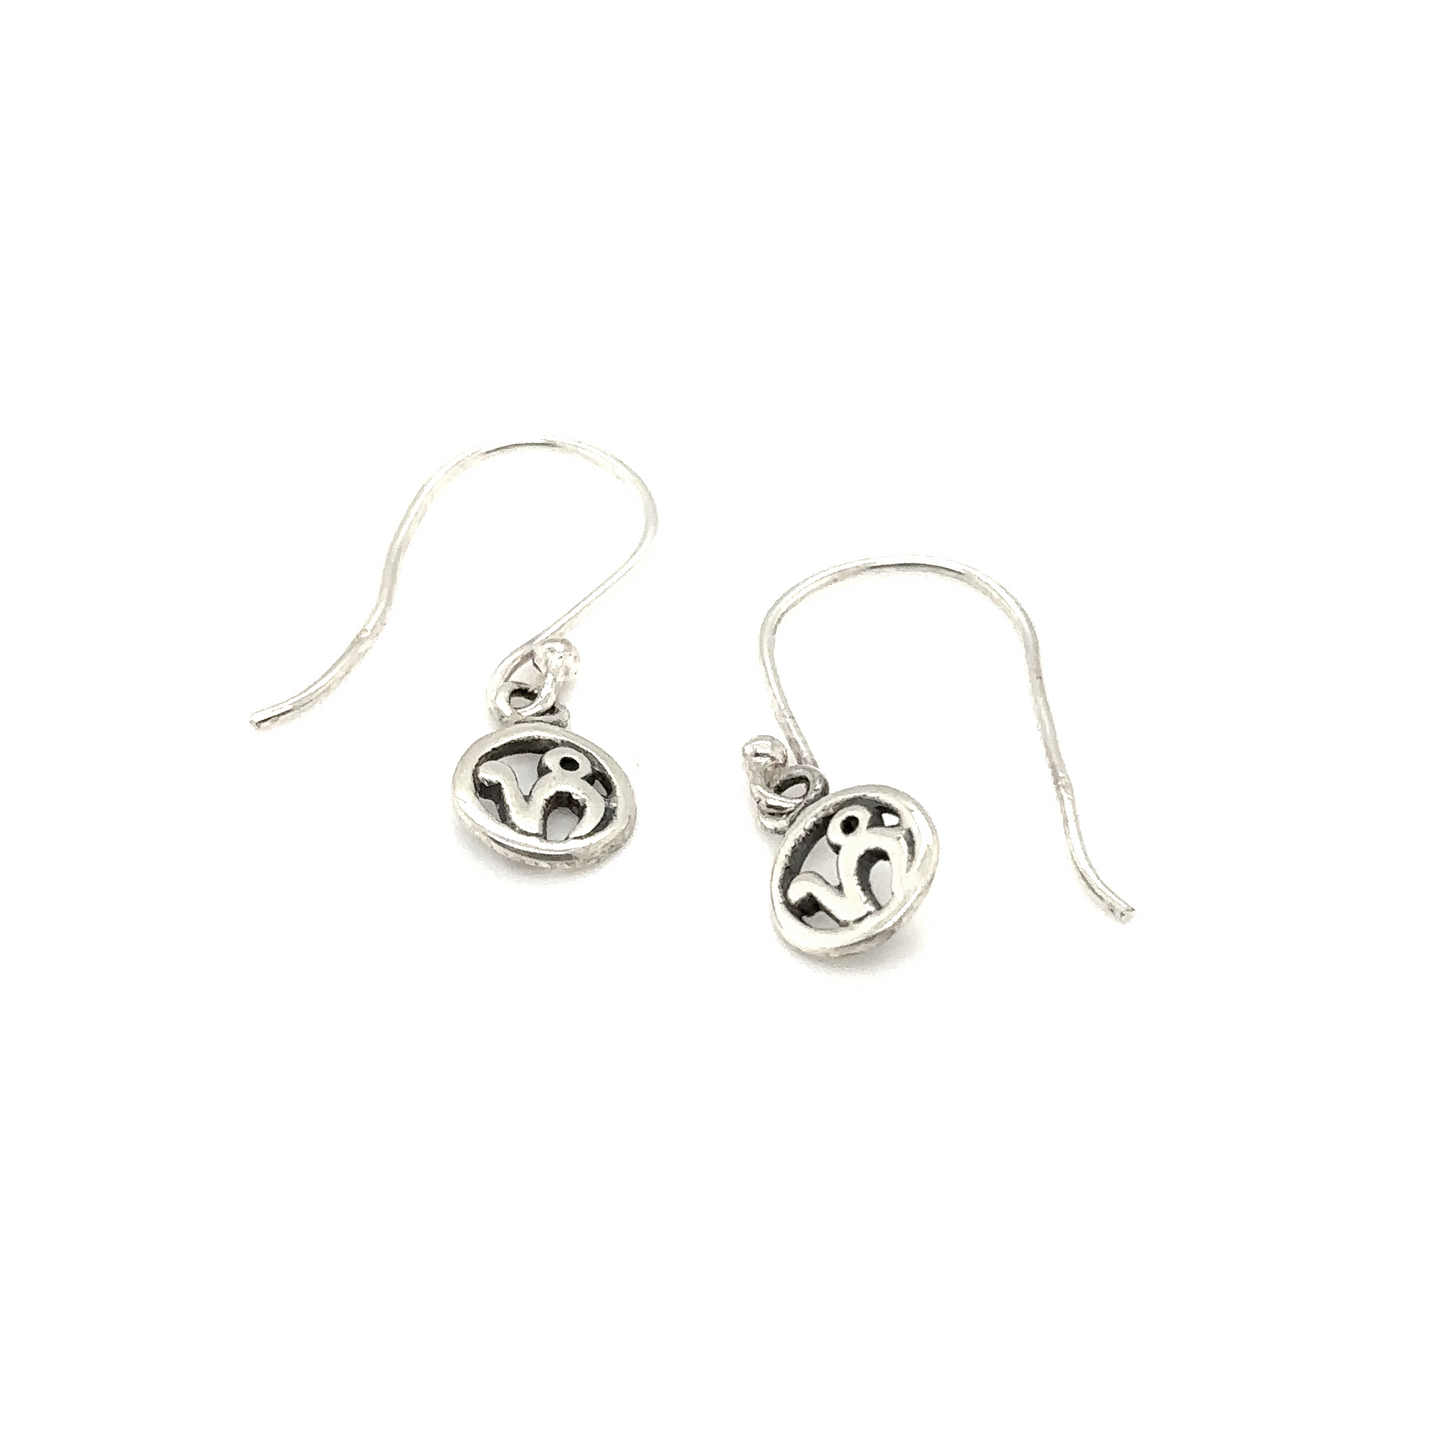 Super Silver Capricorn Zodiac Earrings with an om symbol on them.